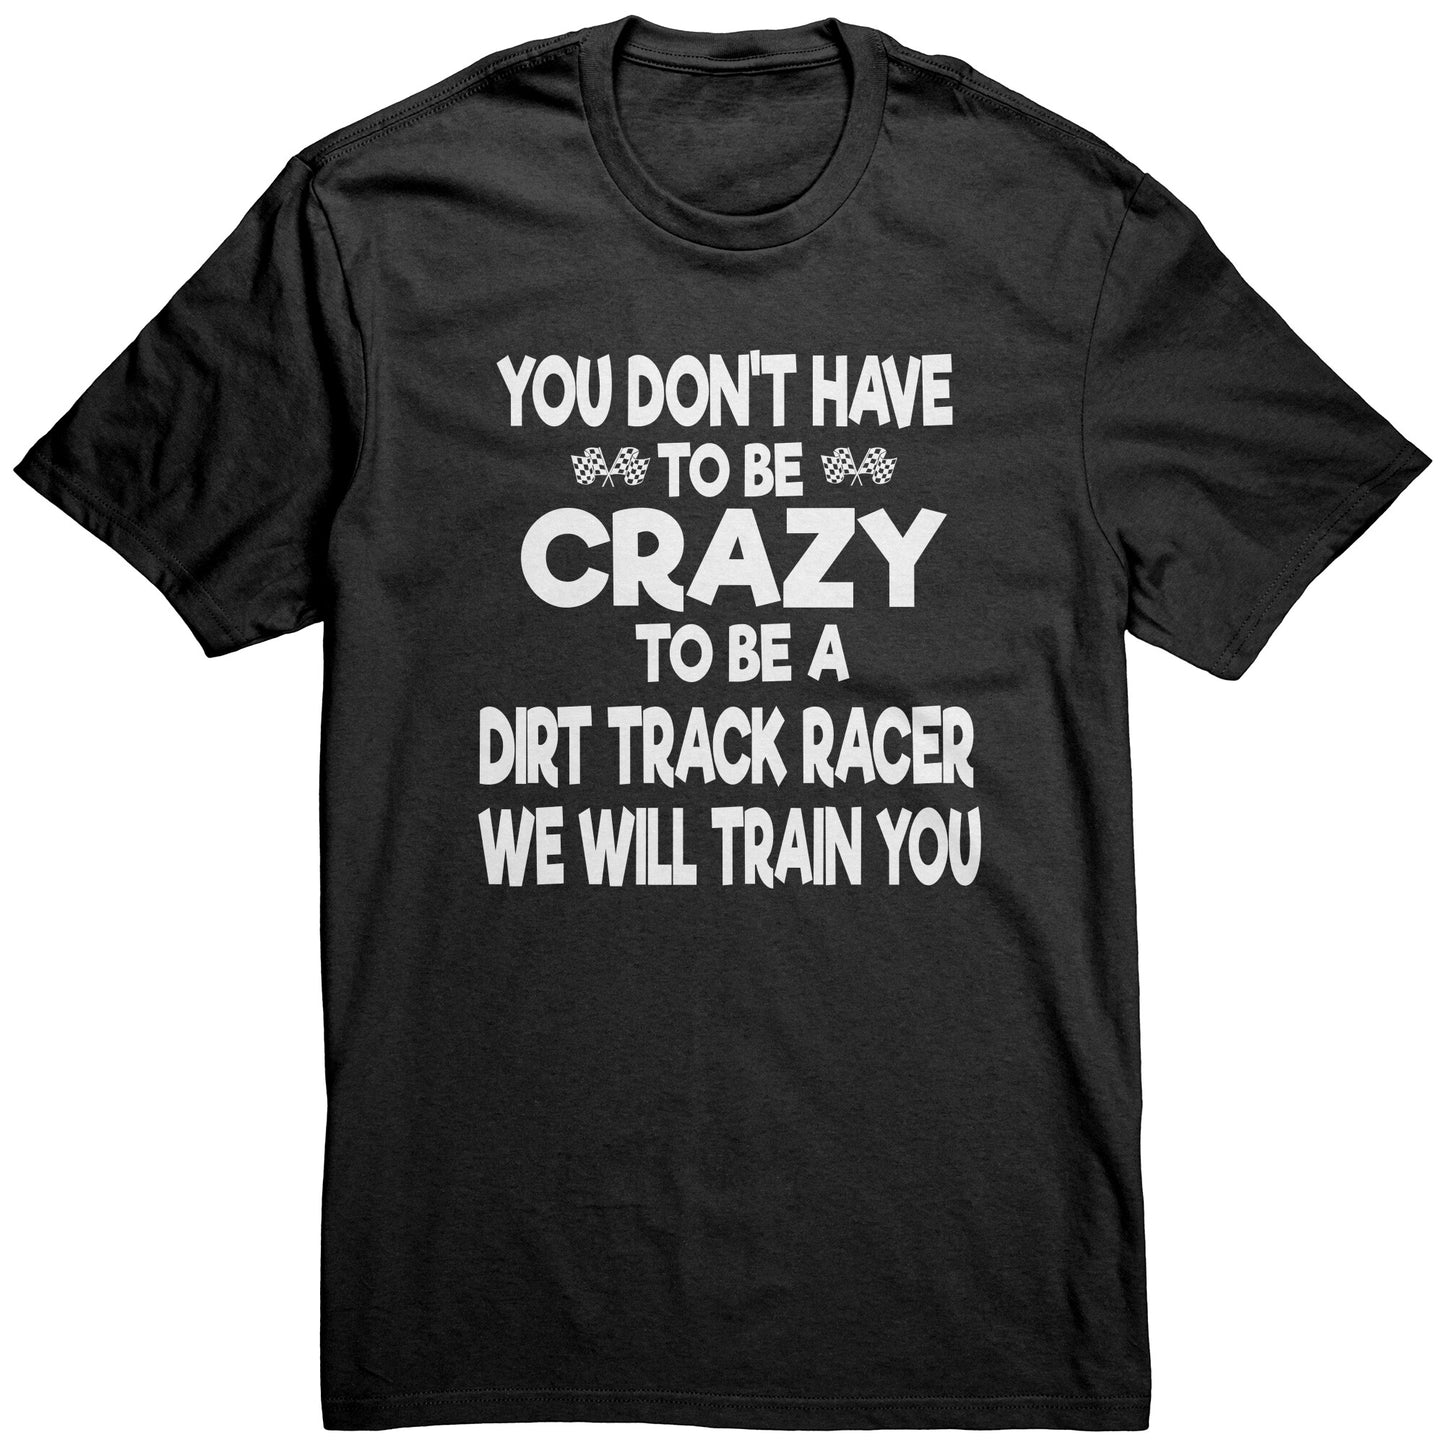 YOU DON'T HAVE TO BE CRAZY TO BE A DIRT TRACK RACER MEN'S T-SHIRT